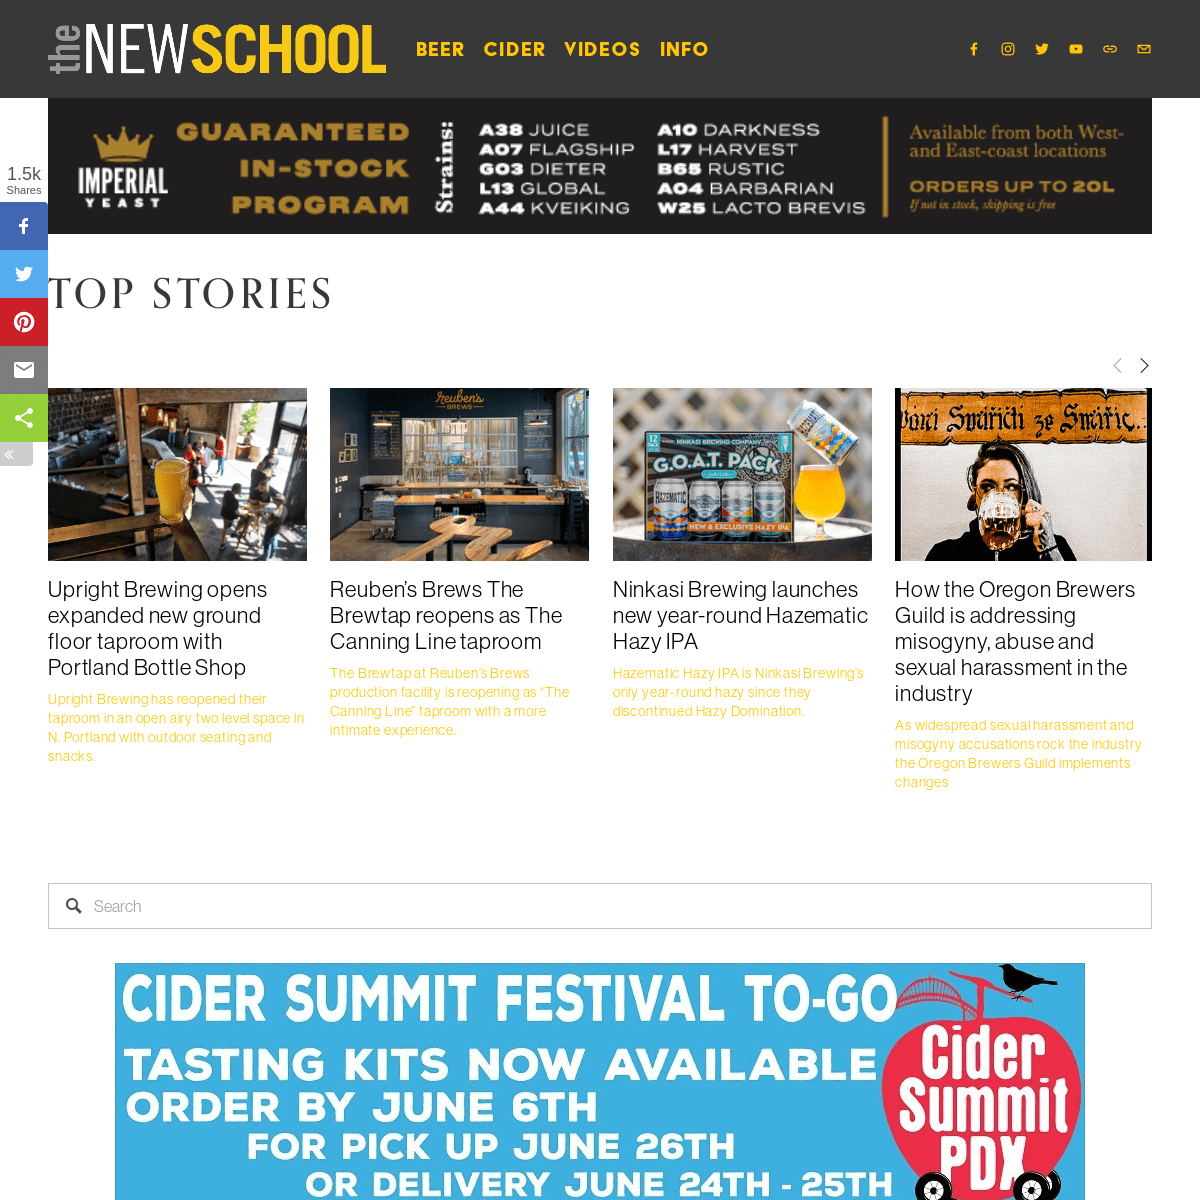 A complete backup of https://newschoolbeer.com